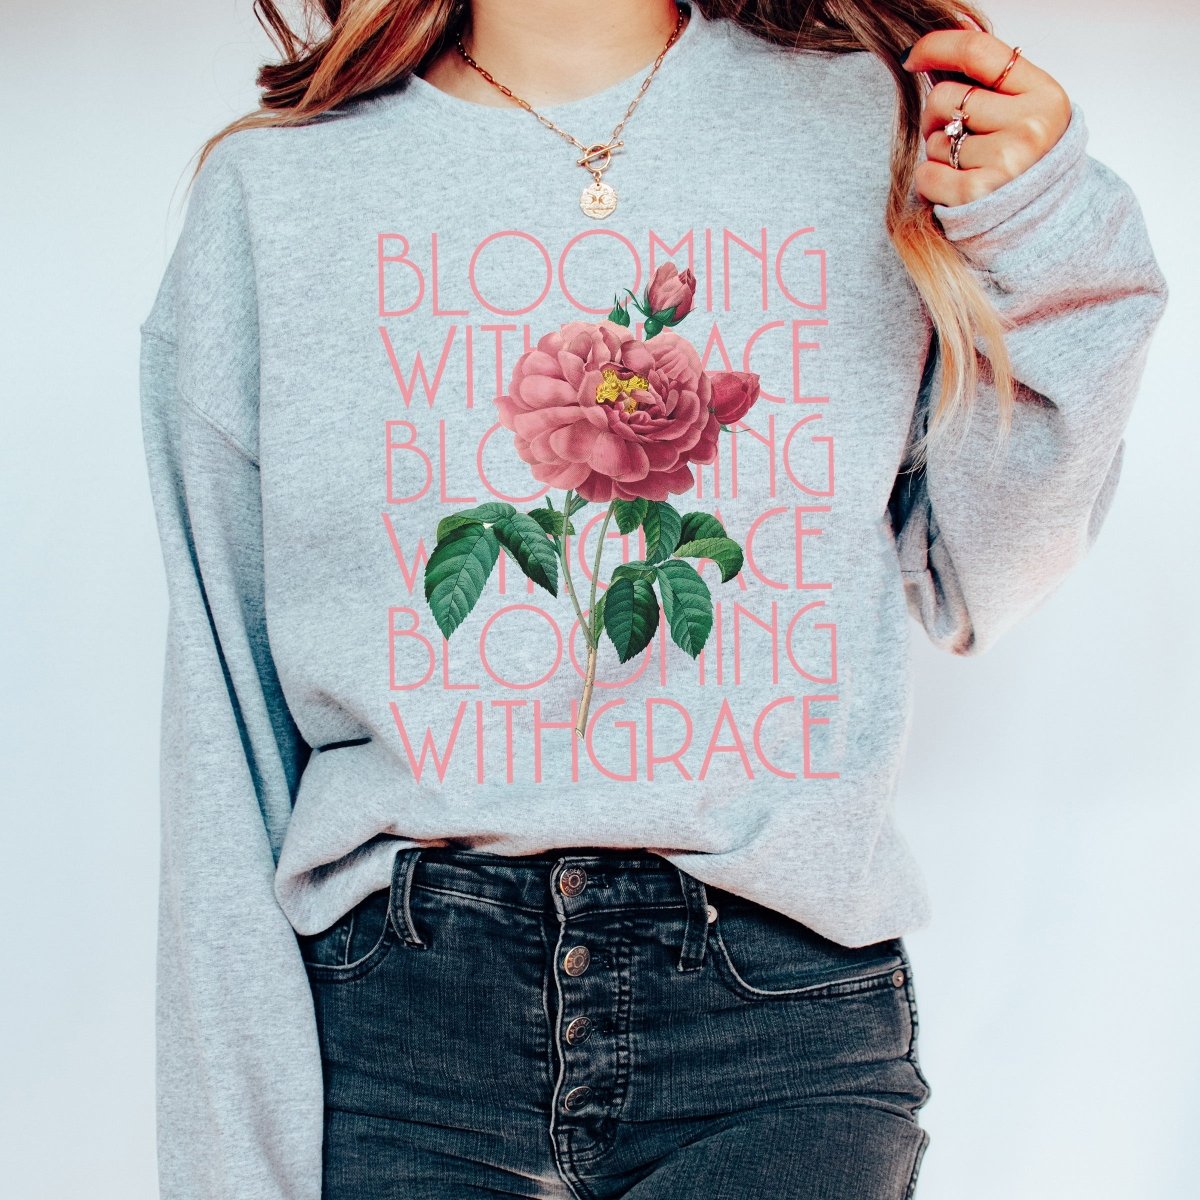 Colored Bloom With Grace Sweatshirts Pullovers aesthetic Fashion